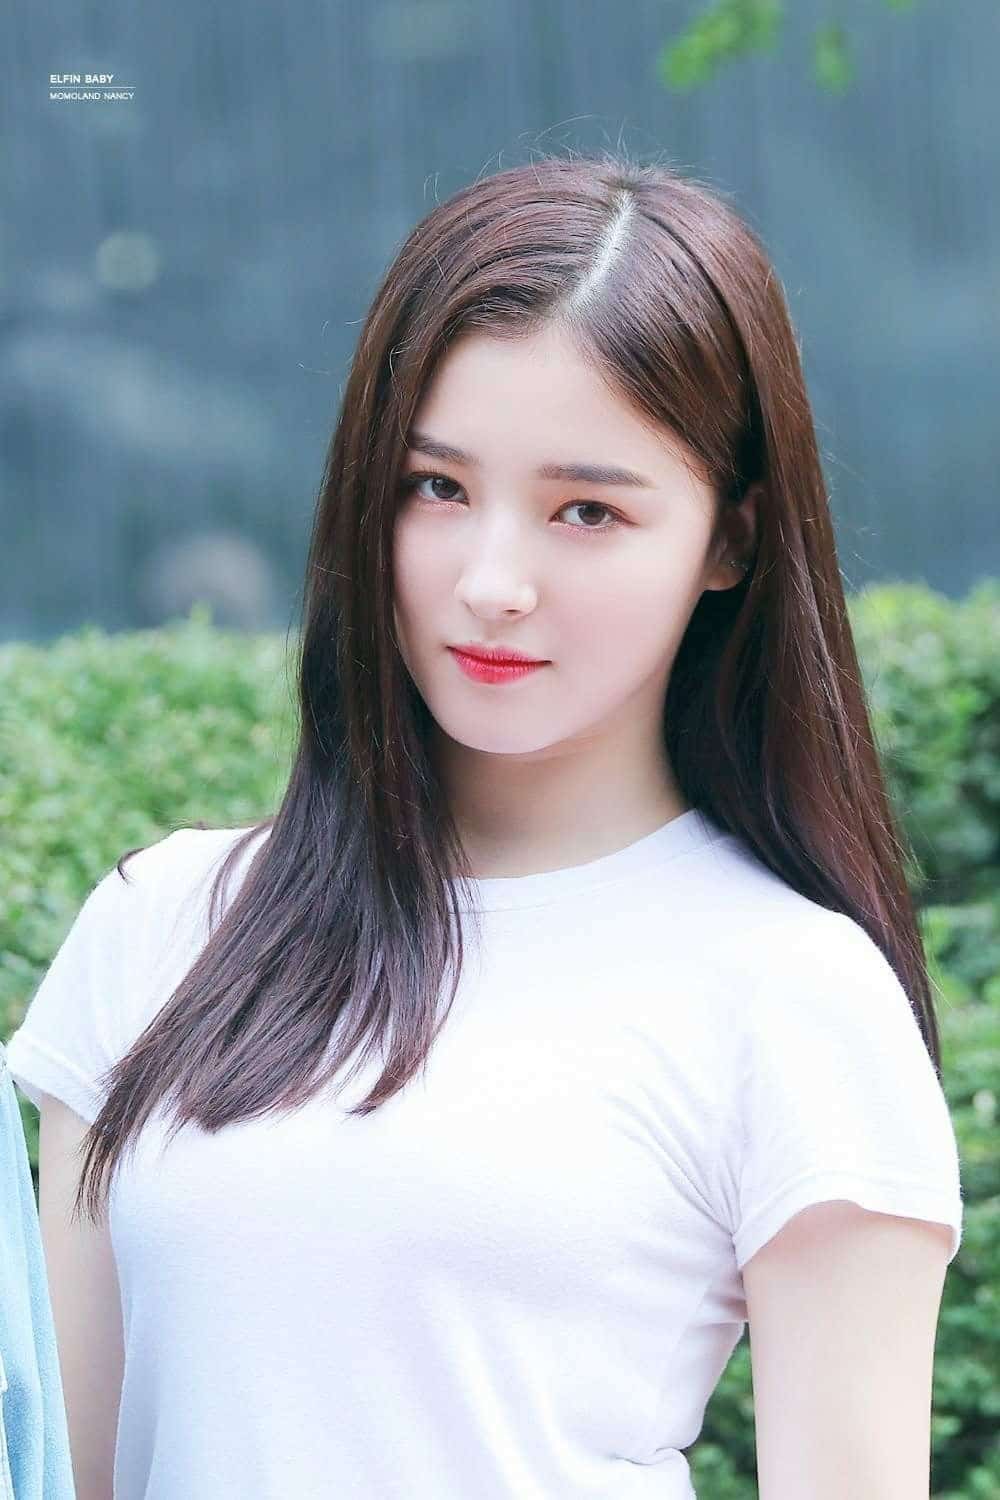 How Old Is Nancy Momoland Lodge State